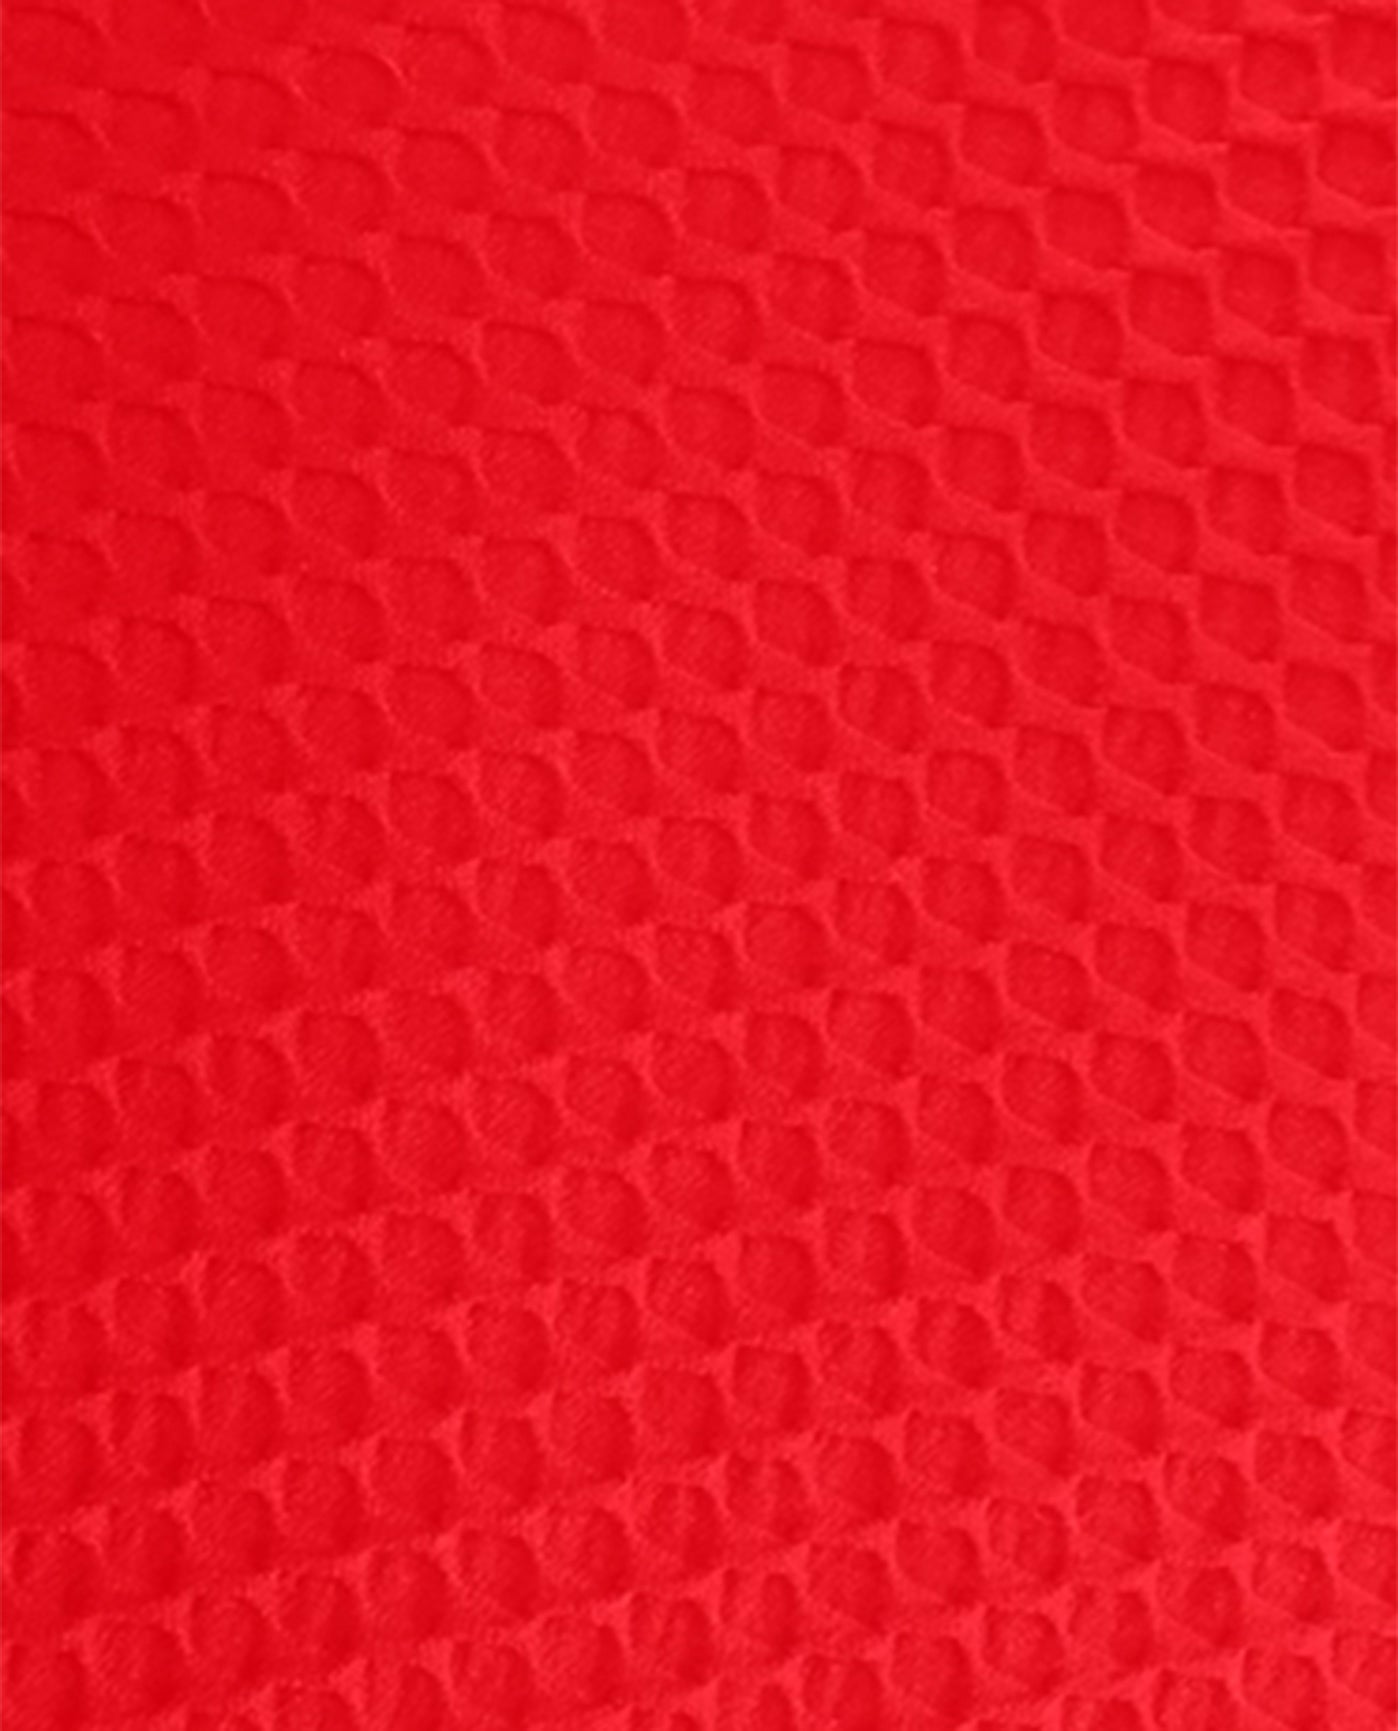 FABRIC SWATCH VIEW OF CHLORINE RESISTANT AQUAMORE SOLID TEXTURED HIGH NECK PLUS SIZE LONG TORSO SWIMSUIT | 512 AQT TEXTURED SCARLET